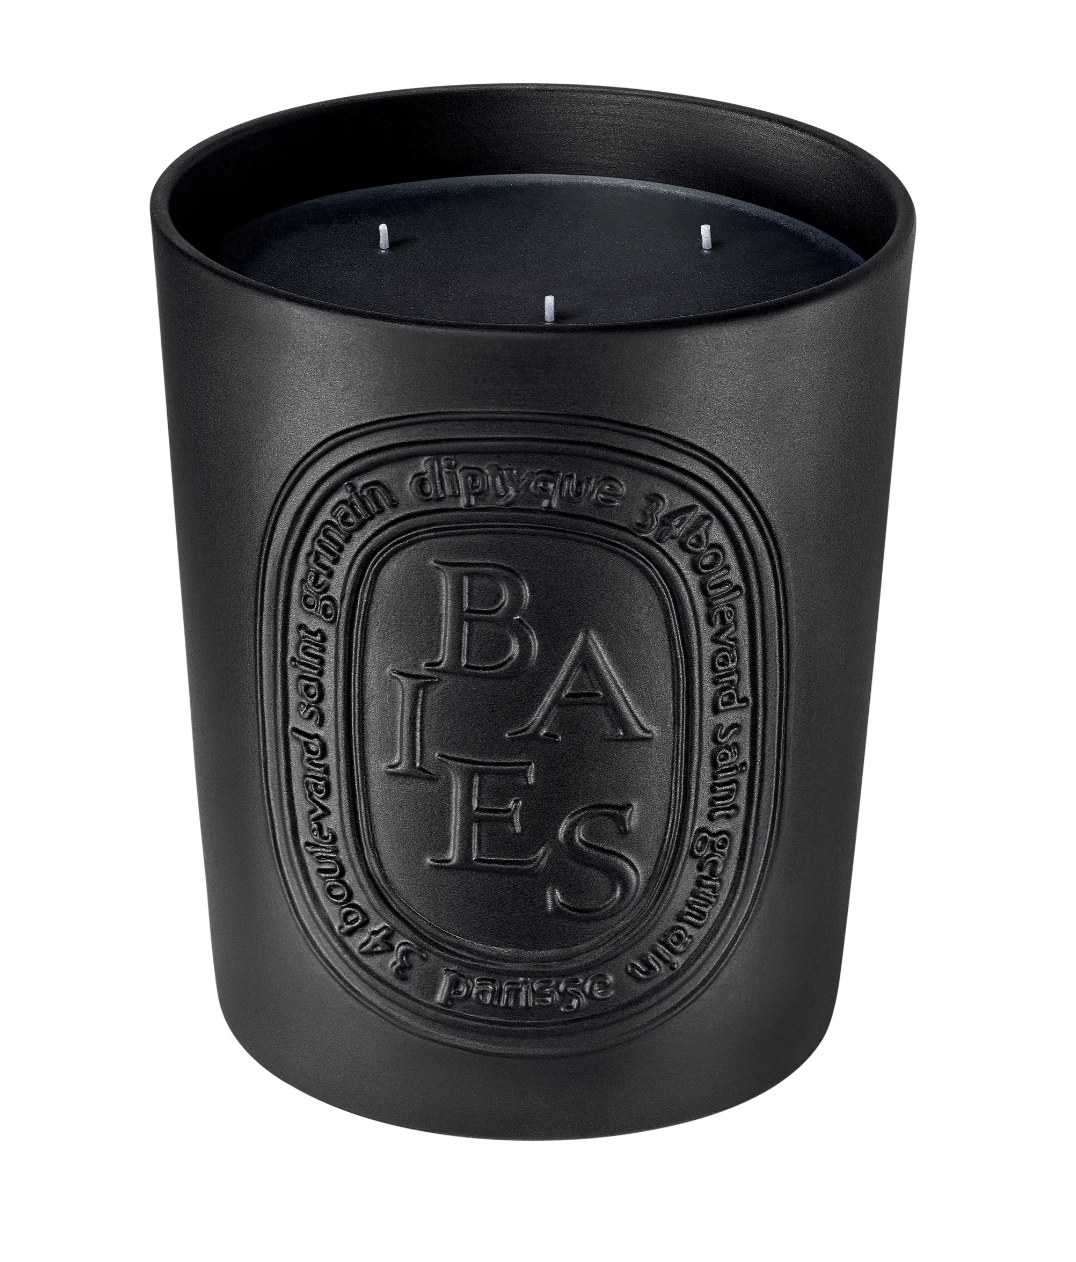 the candle encapsulated in a black porcelain vessel